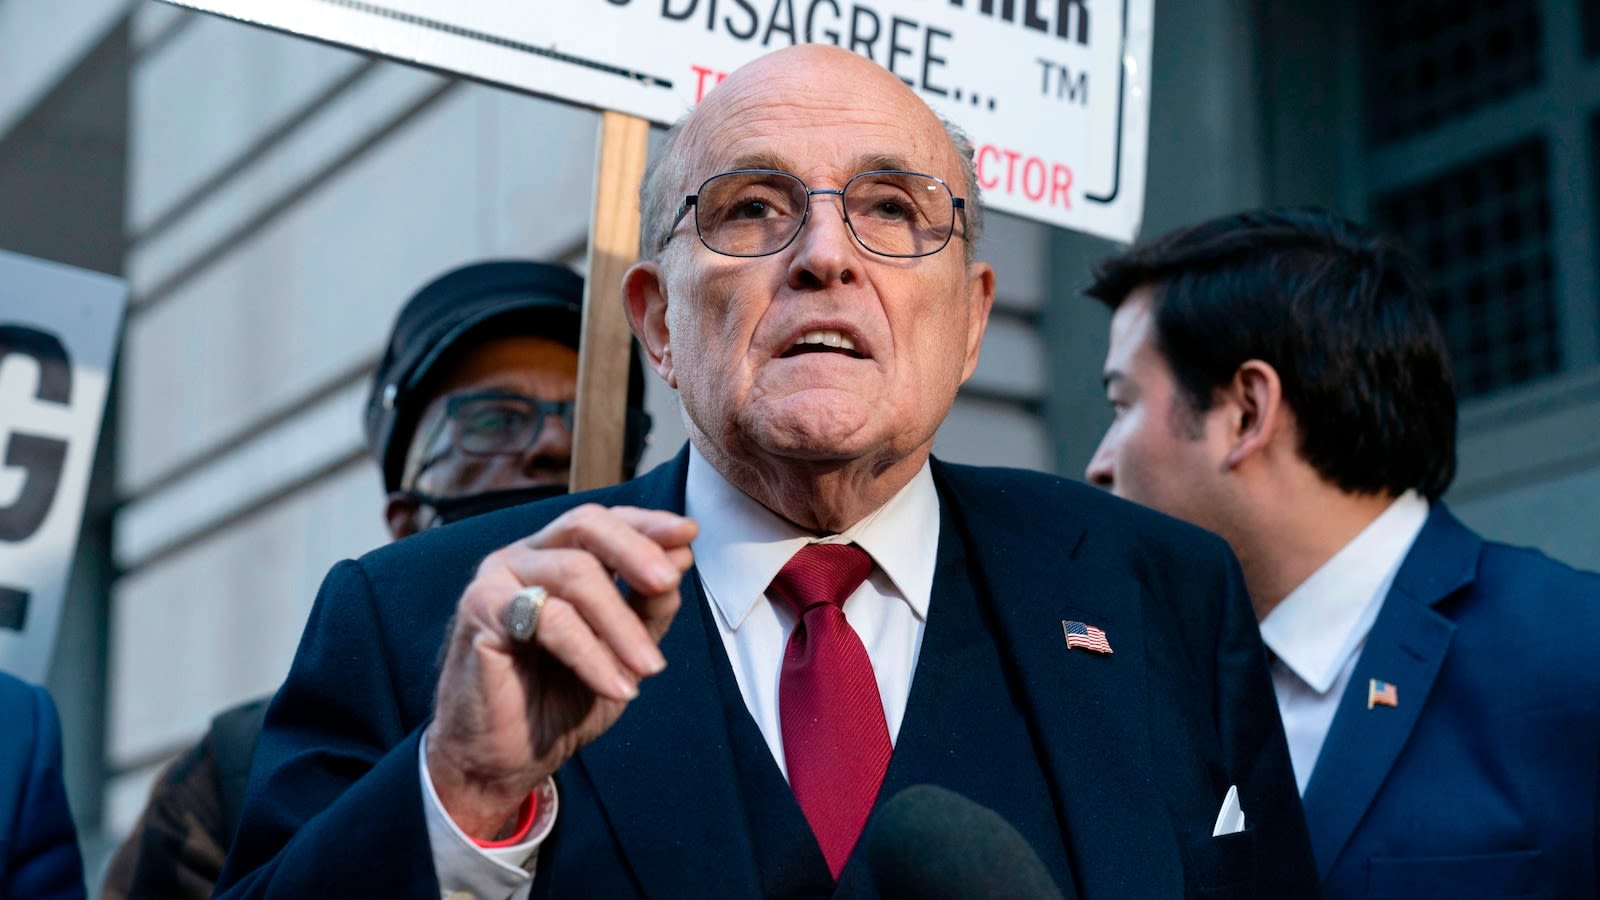 Rudy Giuliani, others expected to be arraigned in Arizona election interference probe